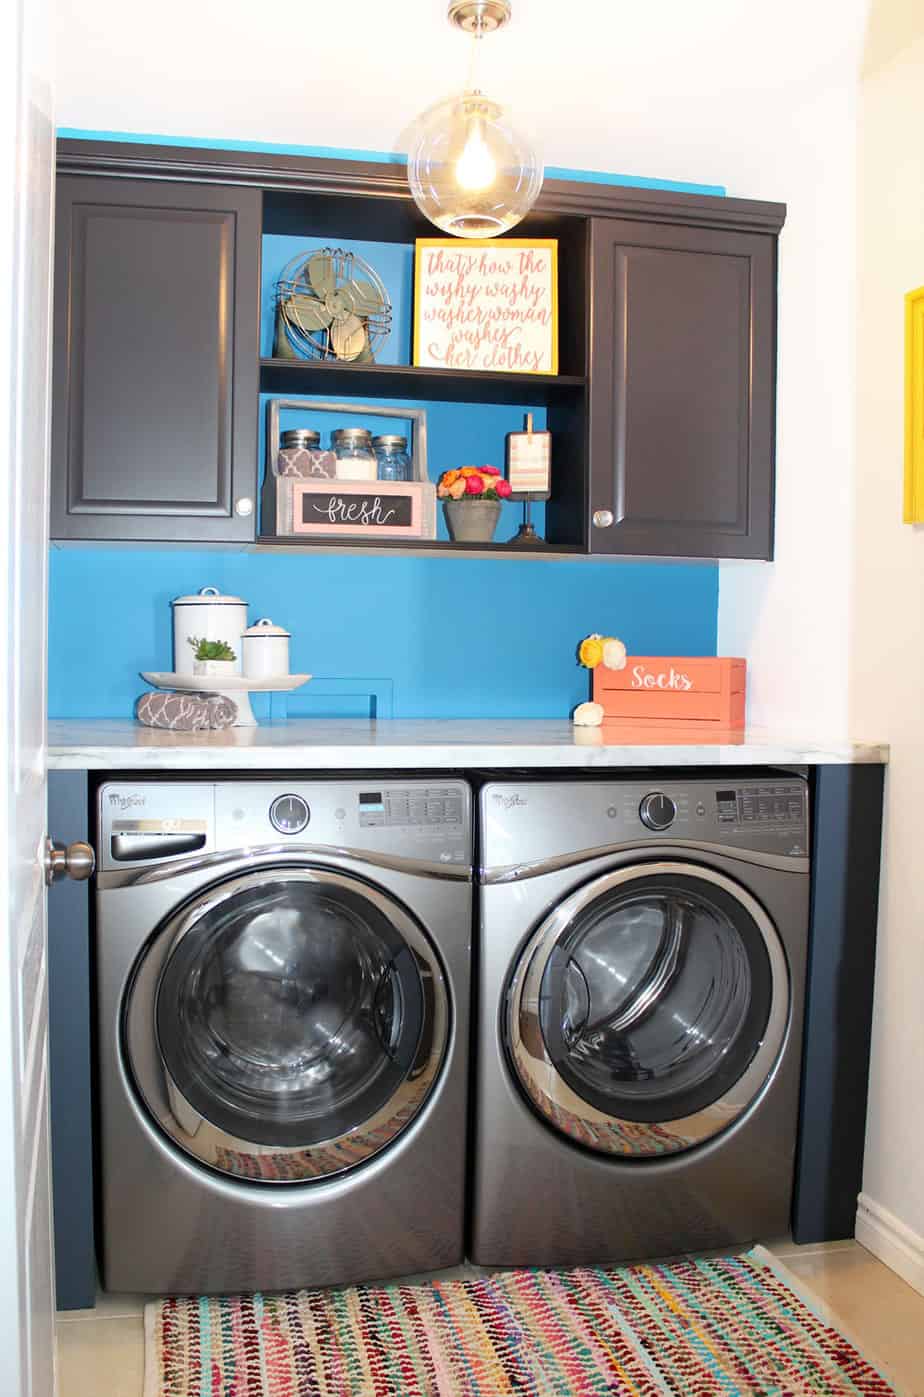 HOW TO: LAUNDRY FOR A SMALL HOME